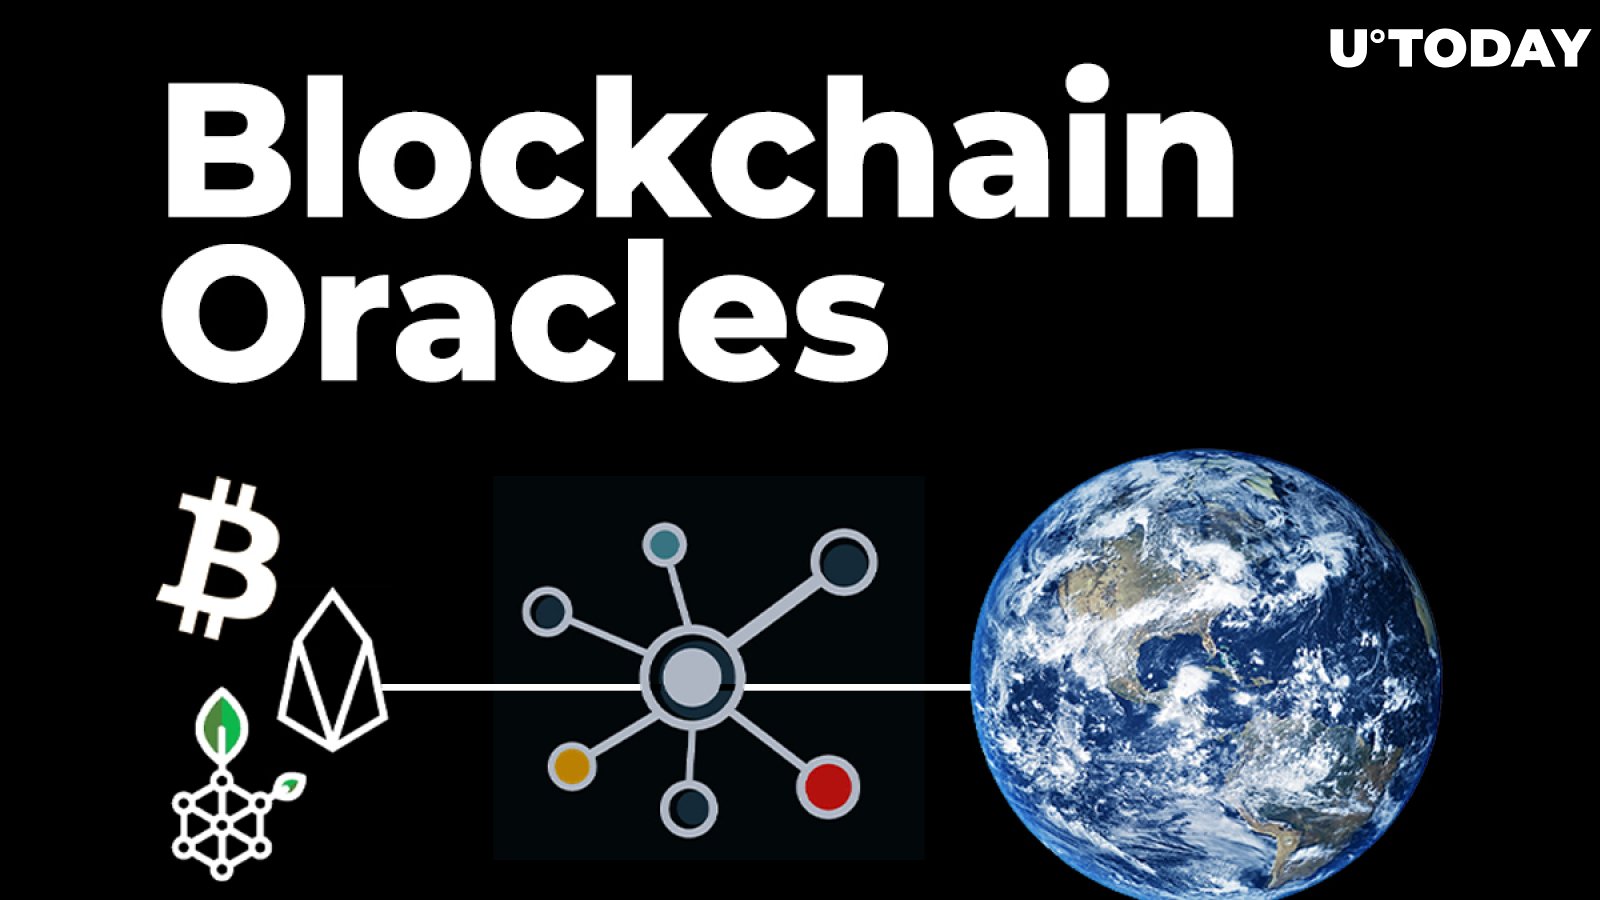 What are Blockchain Oracles?